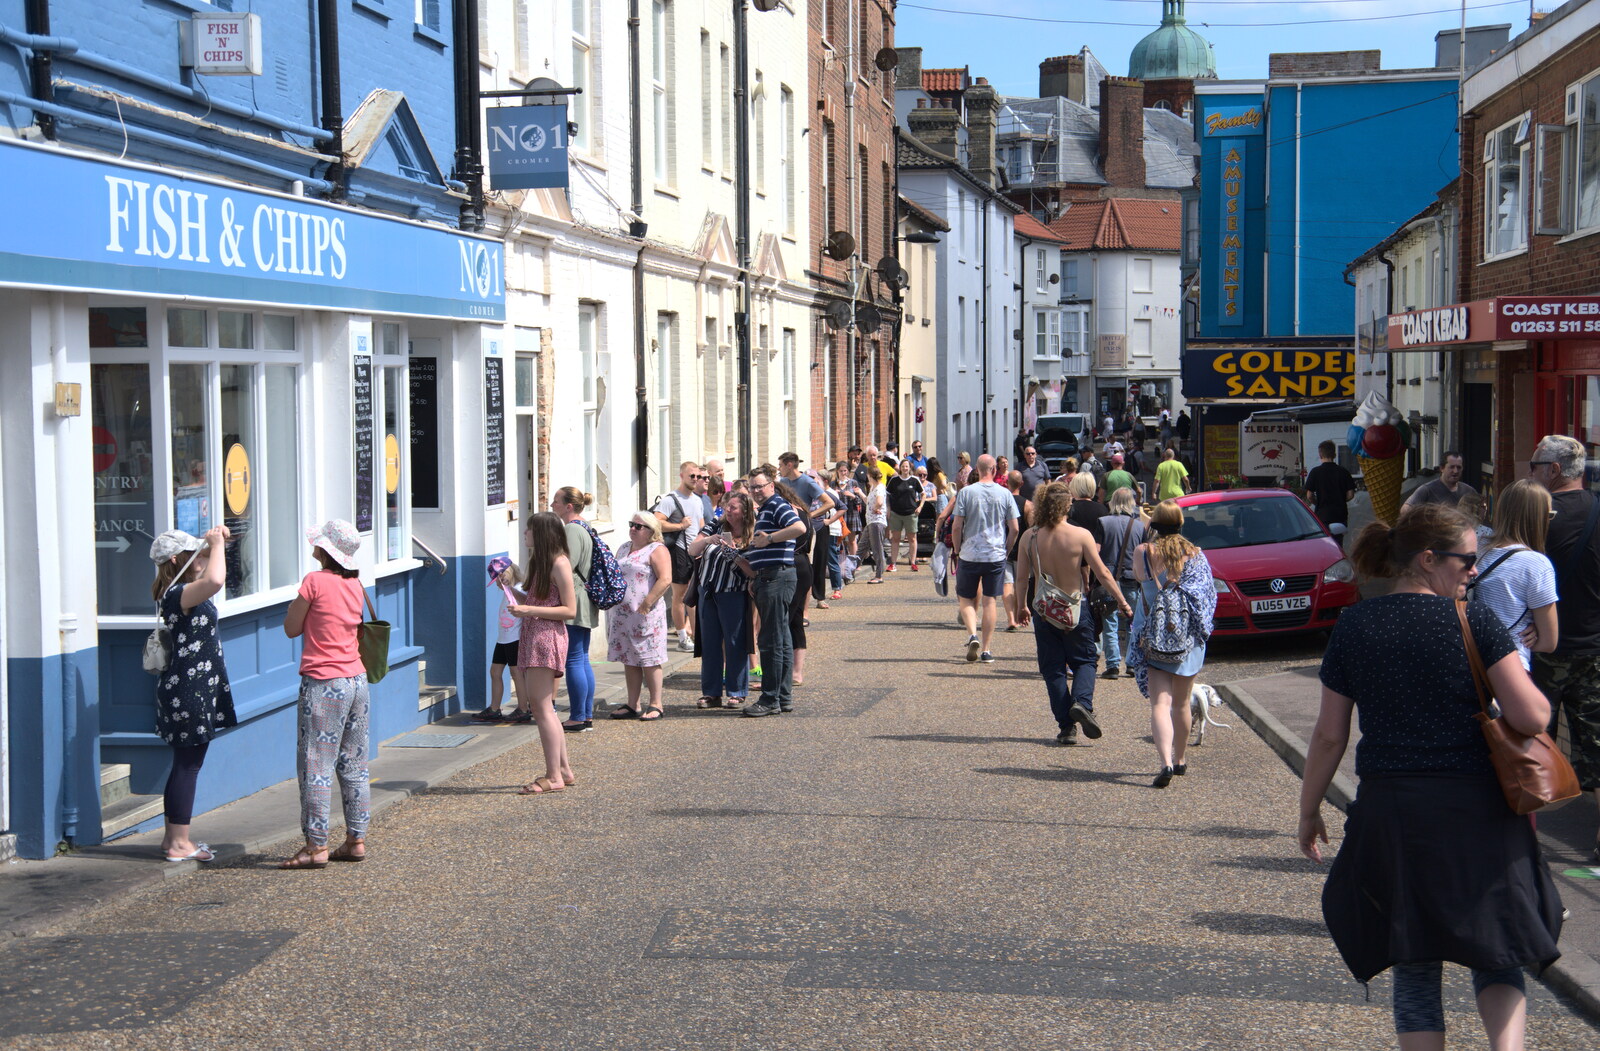 A massive queue for fish and chips from Camping on the Coast, East Runton, North Norfolk - 25th July 2020